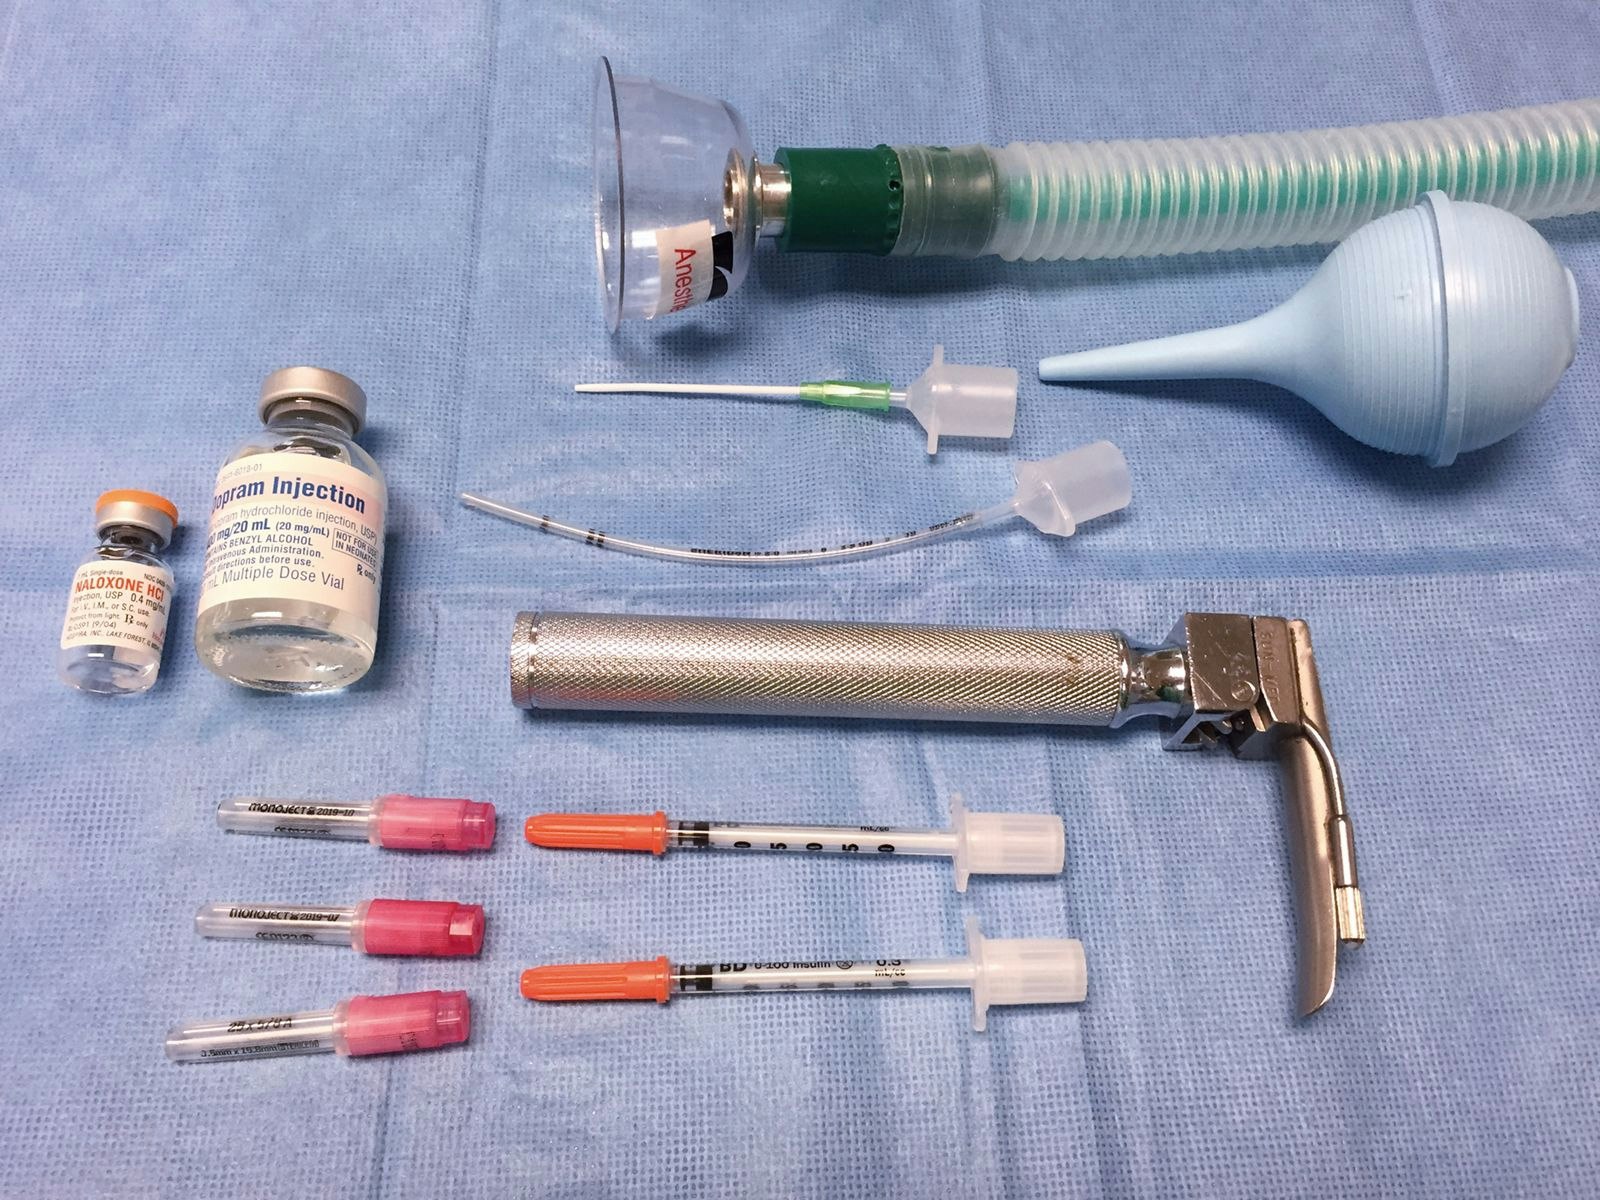 Resuscitation equipment and drugs should be organized before induction of anesthesia.